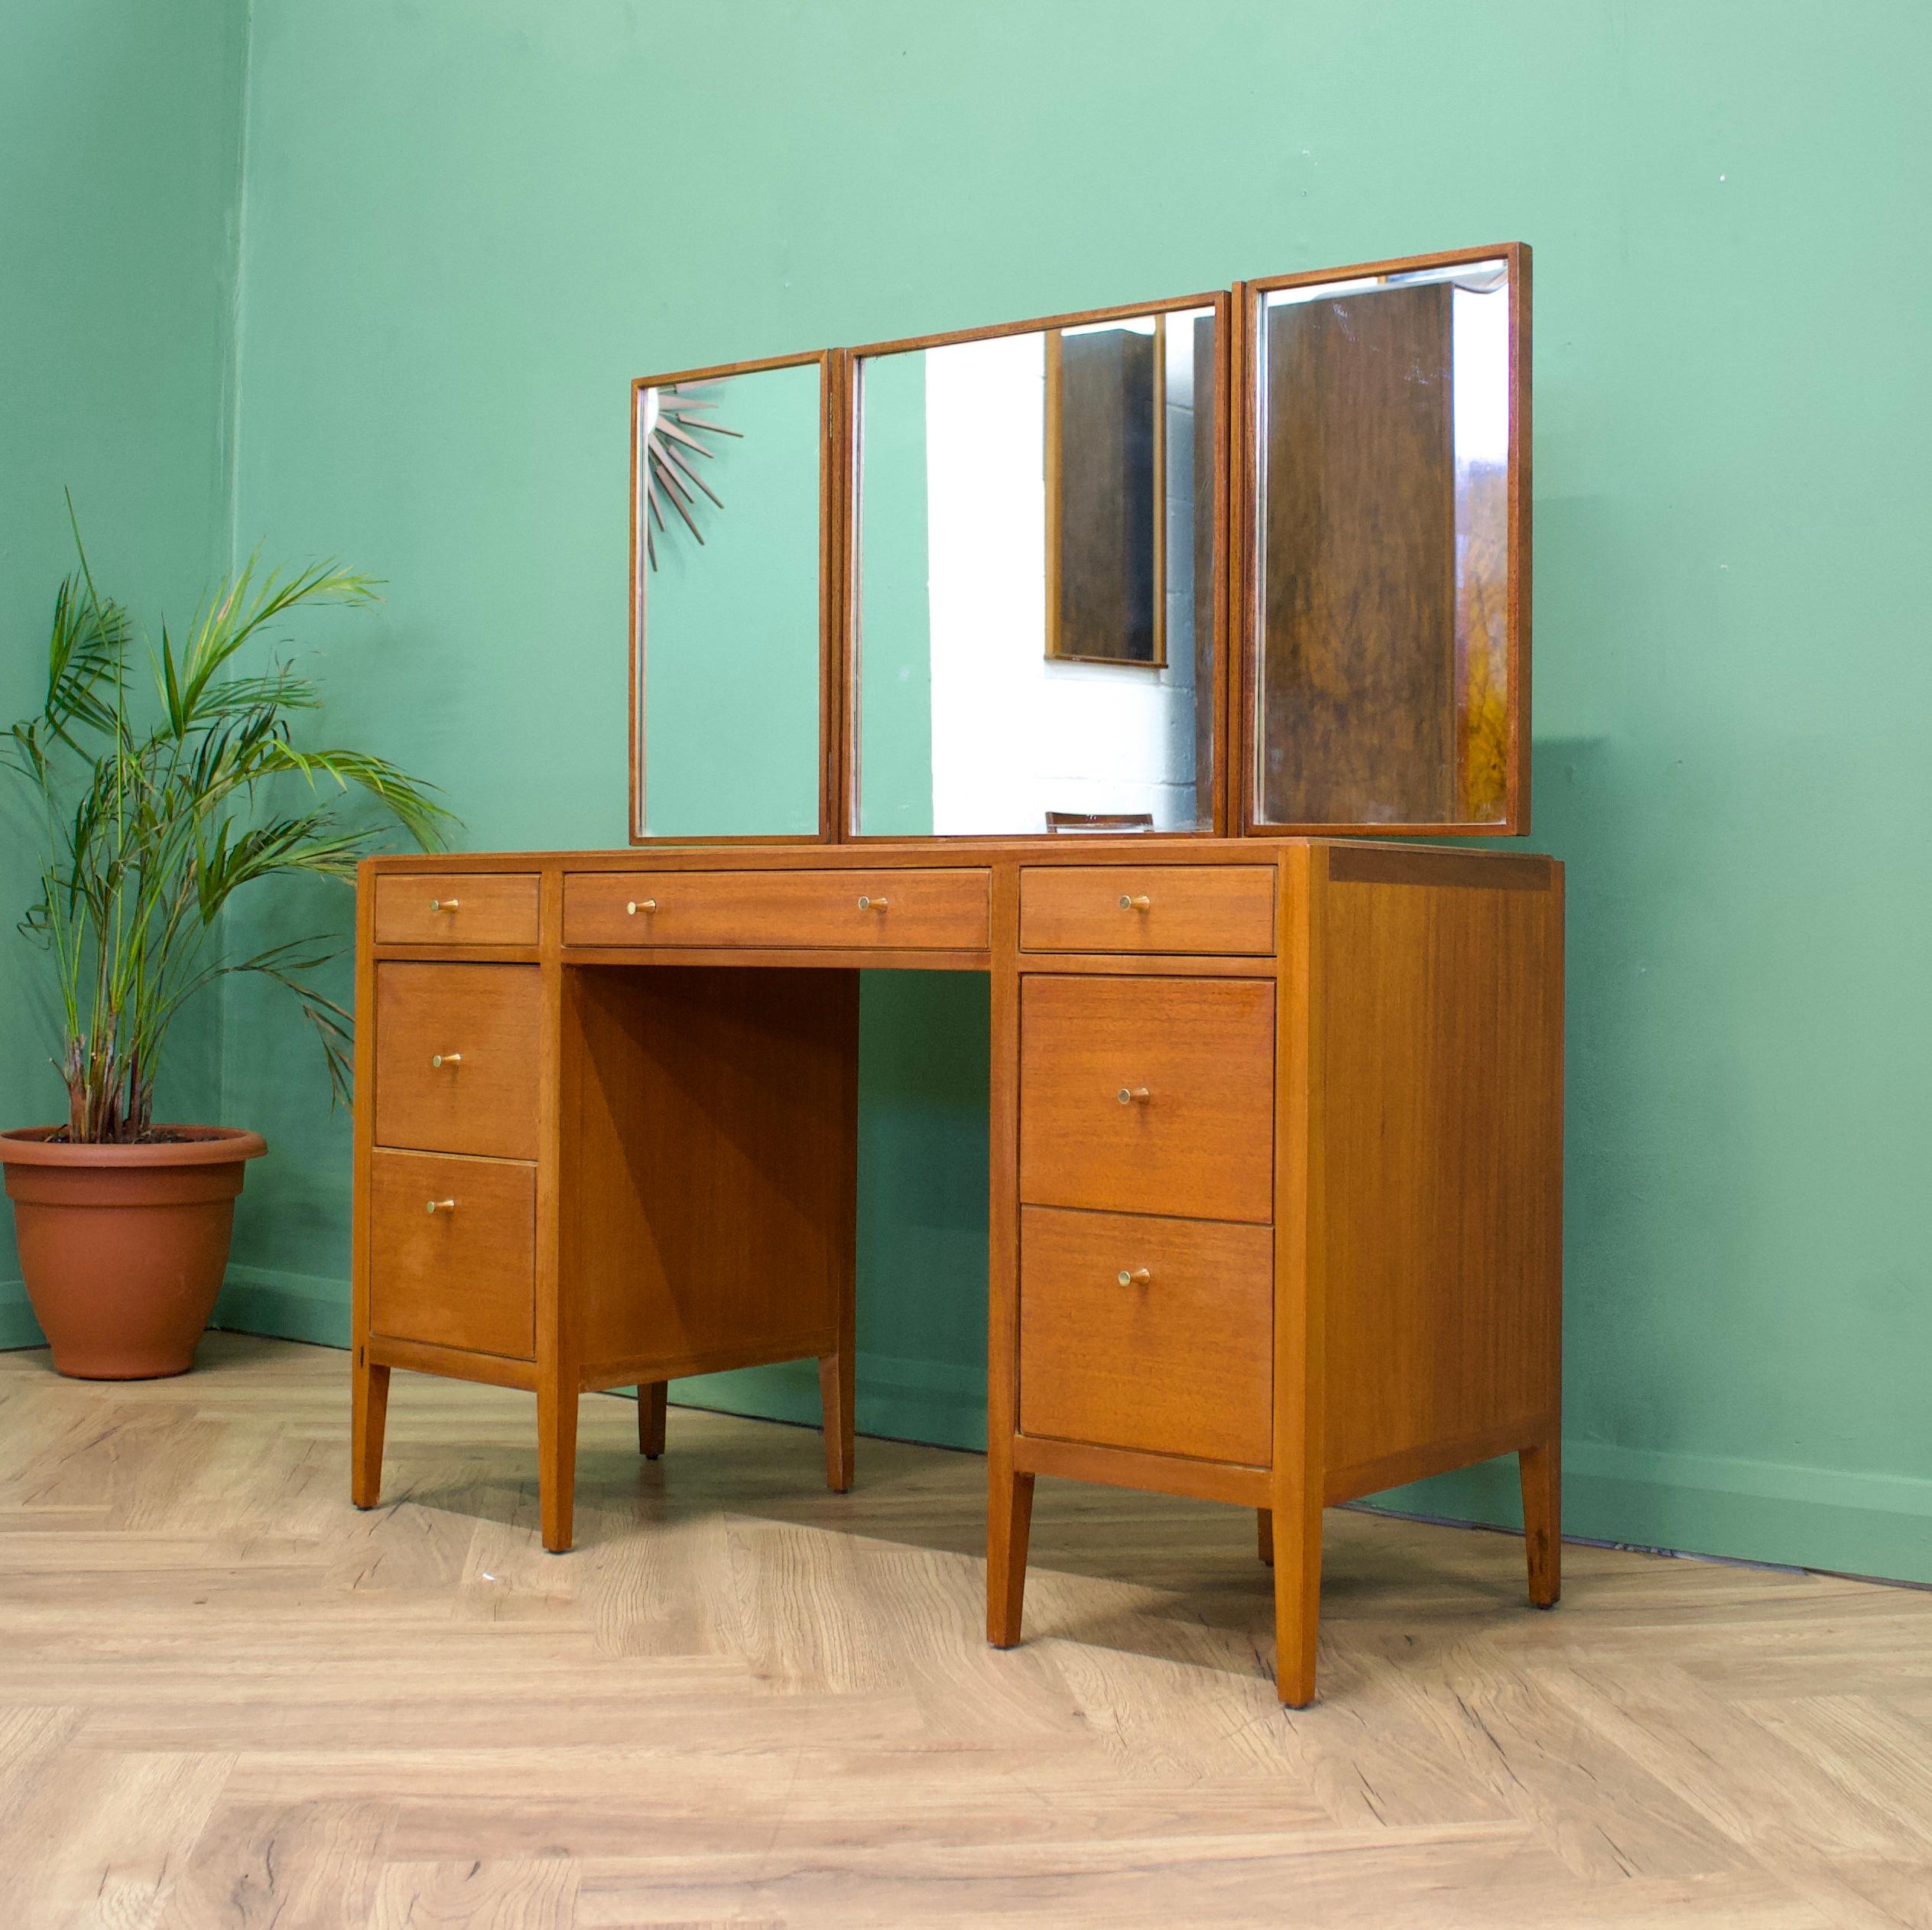 British Midcentury Teak Dressing Table by Heals from Loughborough, 1960s